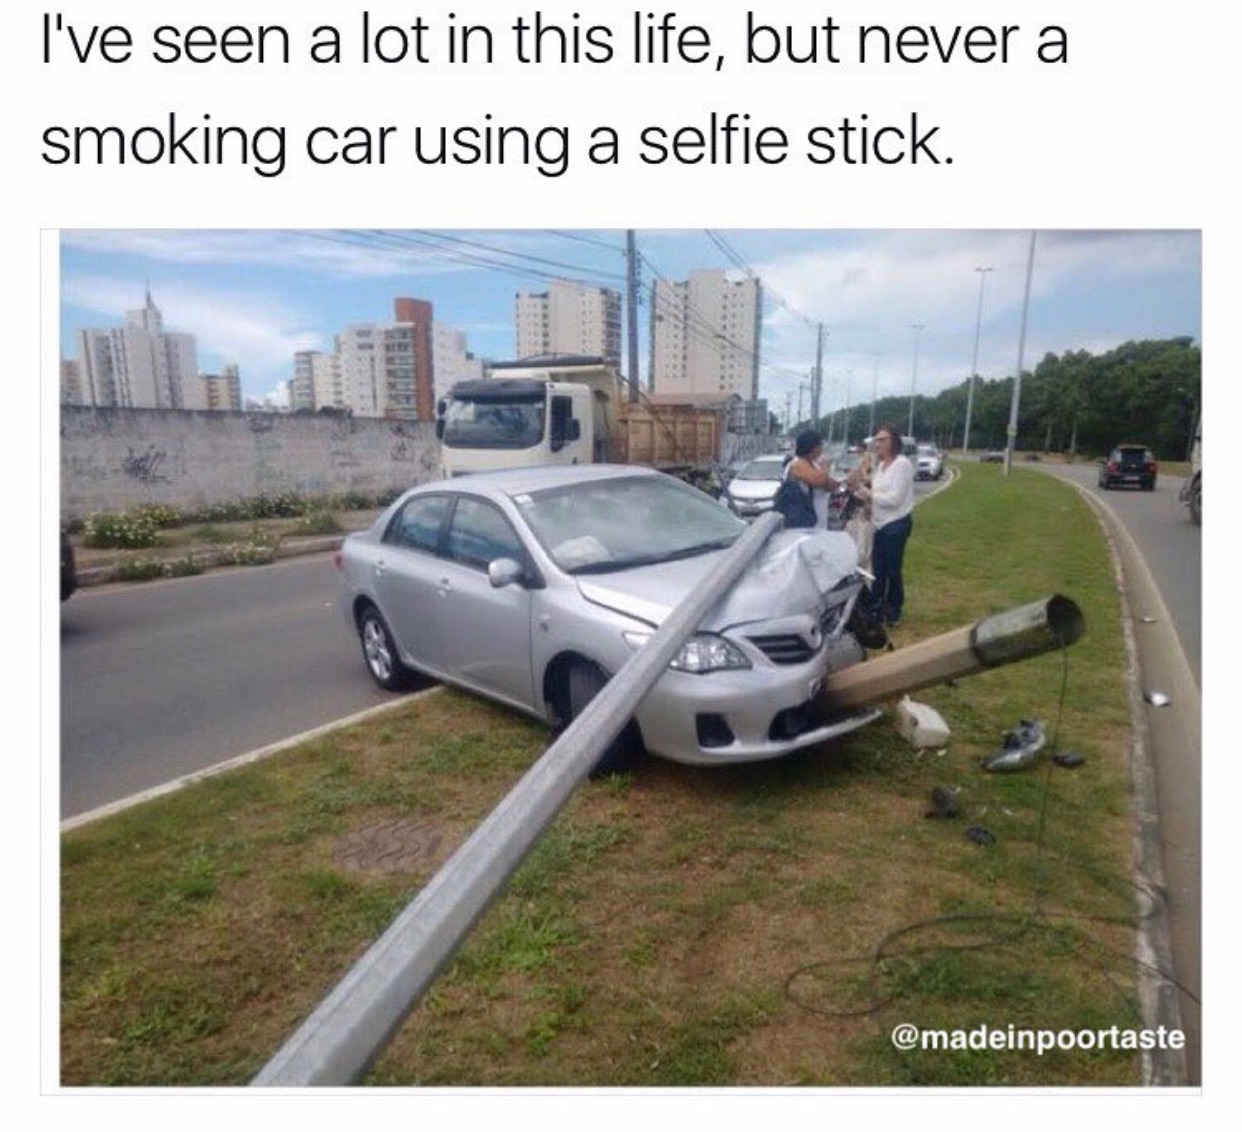 smoking corolla using a selfie stick - I've seen a lot in this life, but never a smoking car using a selfie stick.